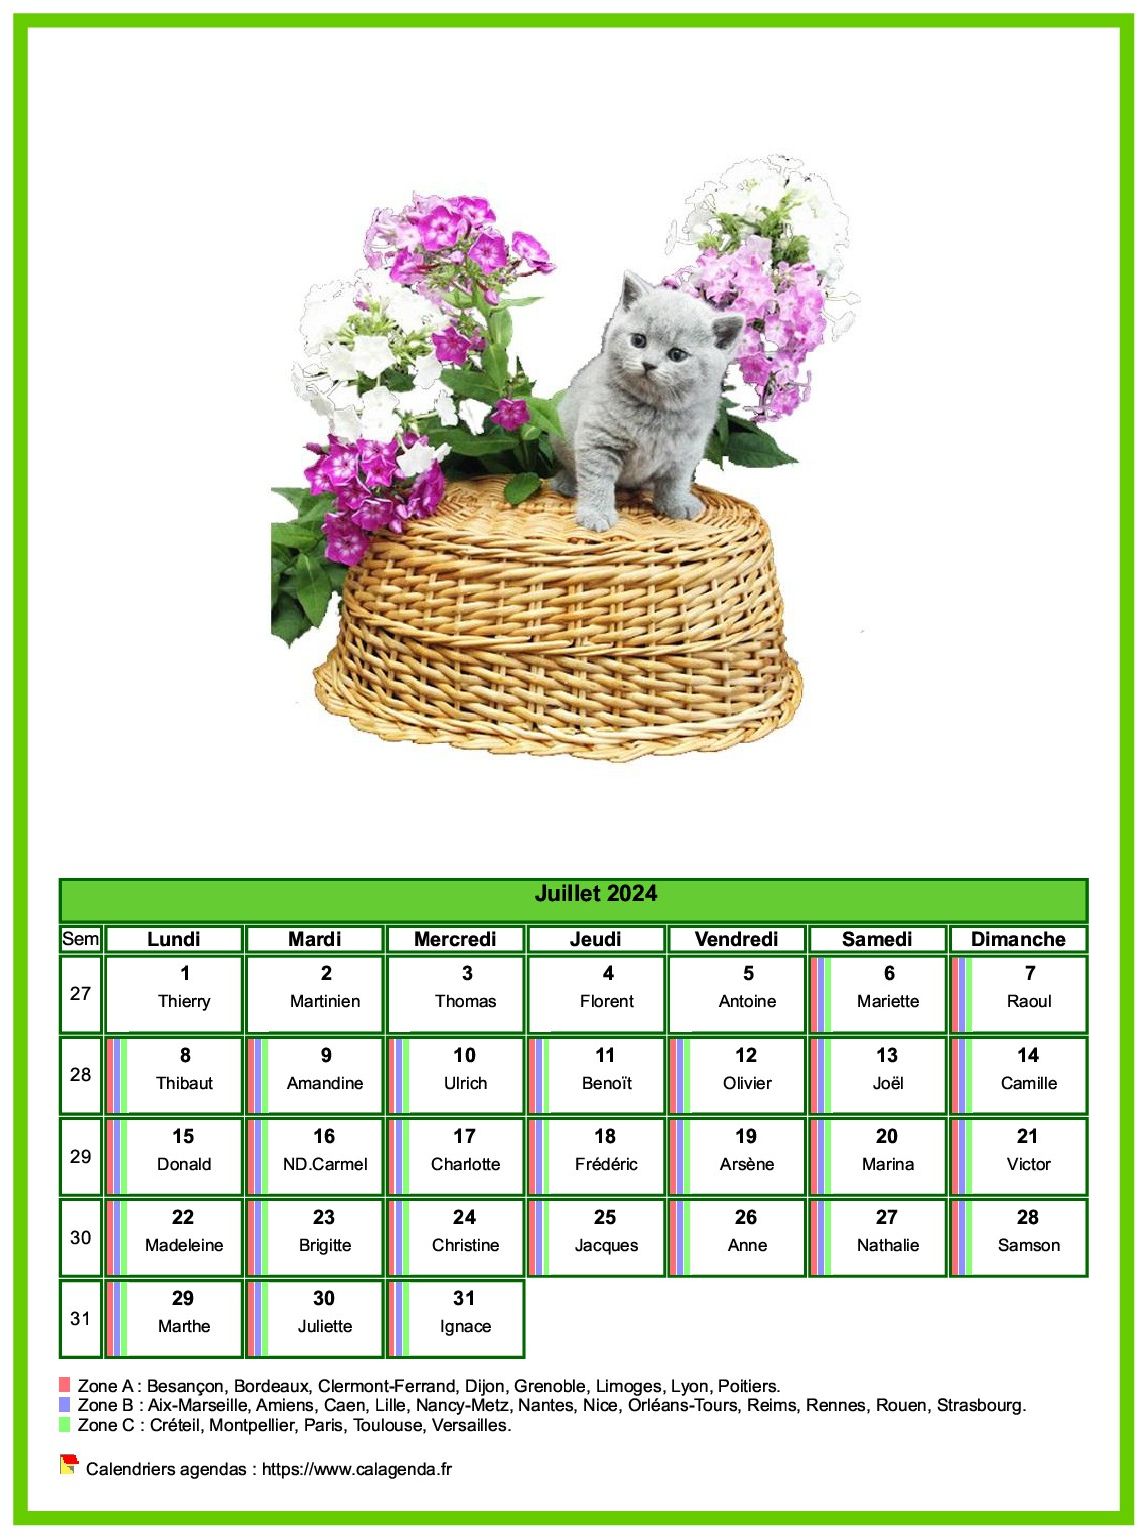 Calendrier juillet 2024 chats